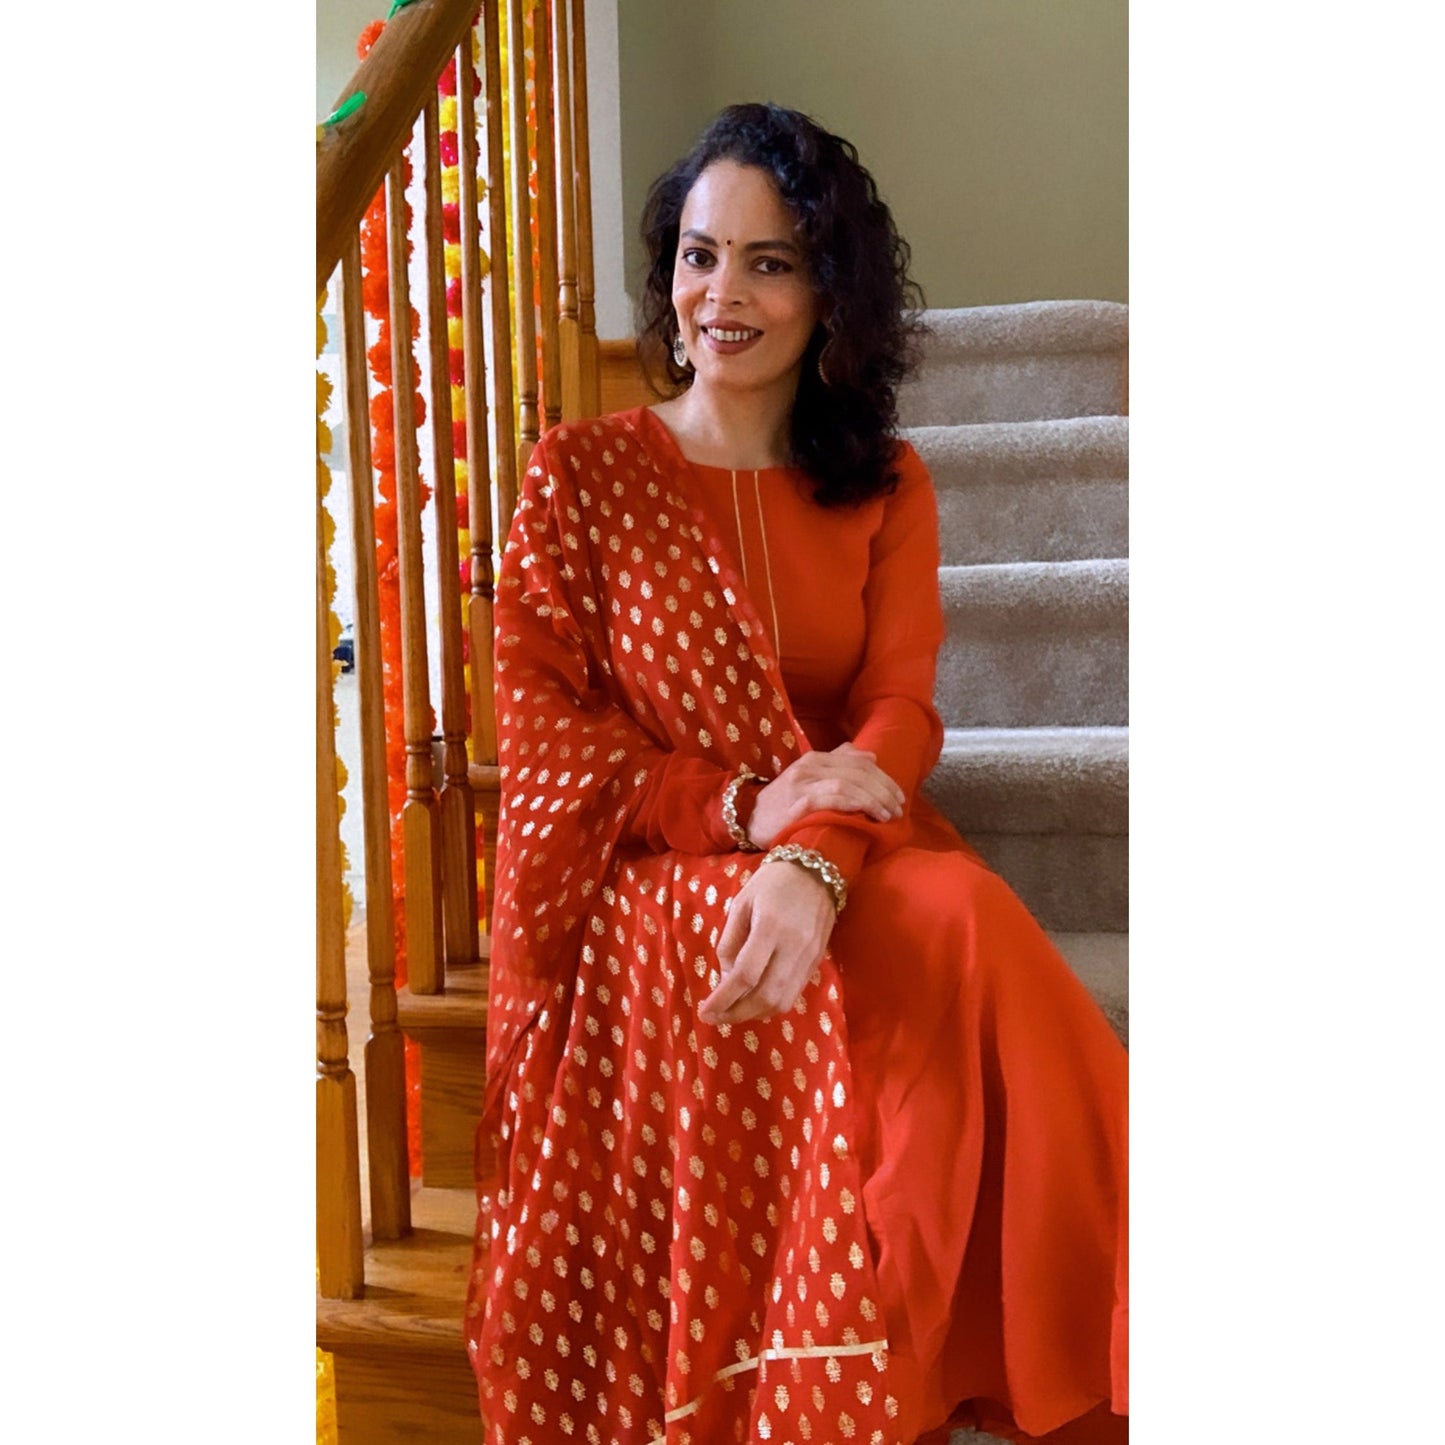 Red and Gold Kurta with Dupatta